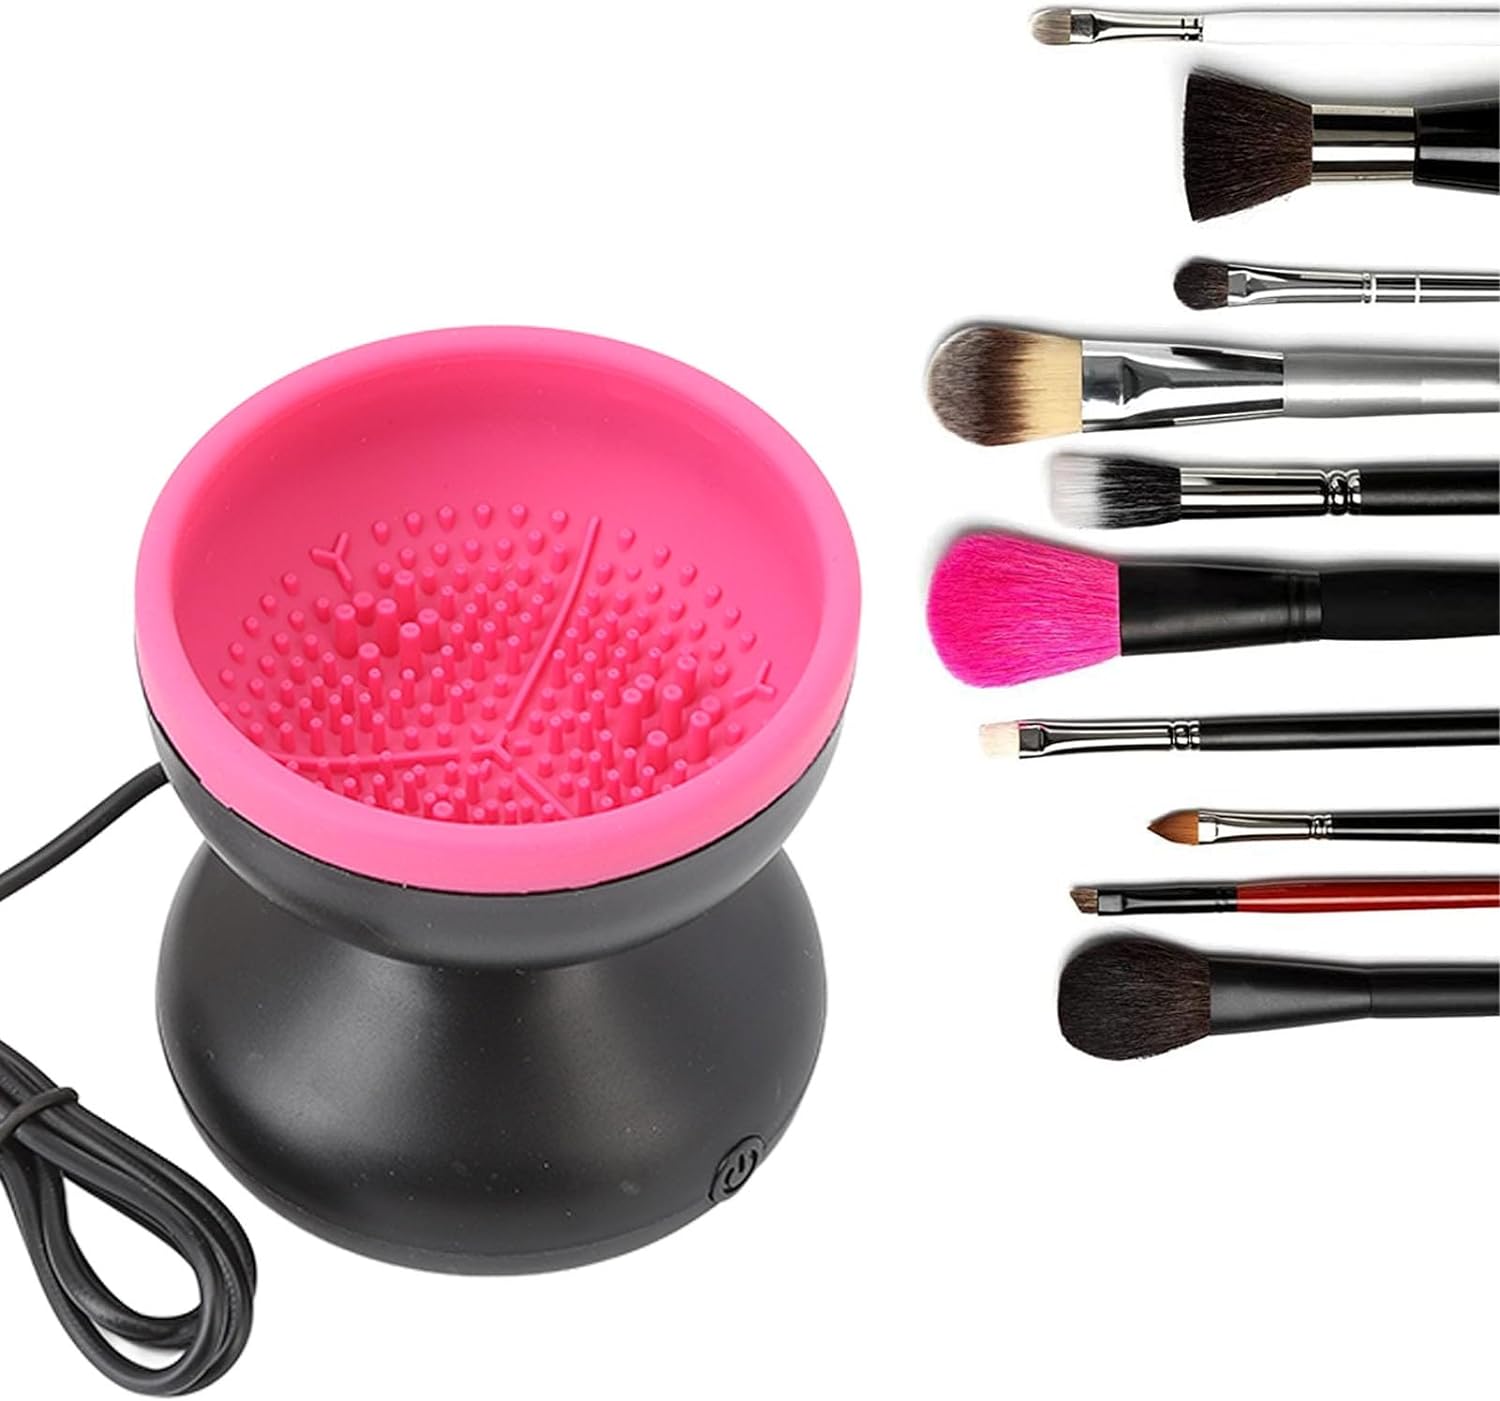 Electric Makeup Brush Cleaner,Portable Automatic USB Cosmetic Brush Cleaner Tools for All Size Beauty Makeup Brushes Set